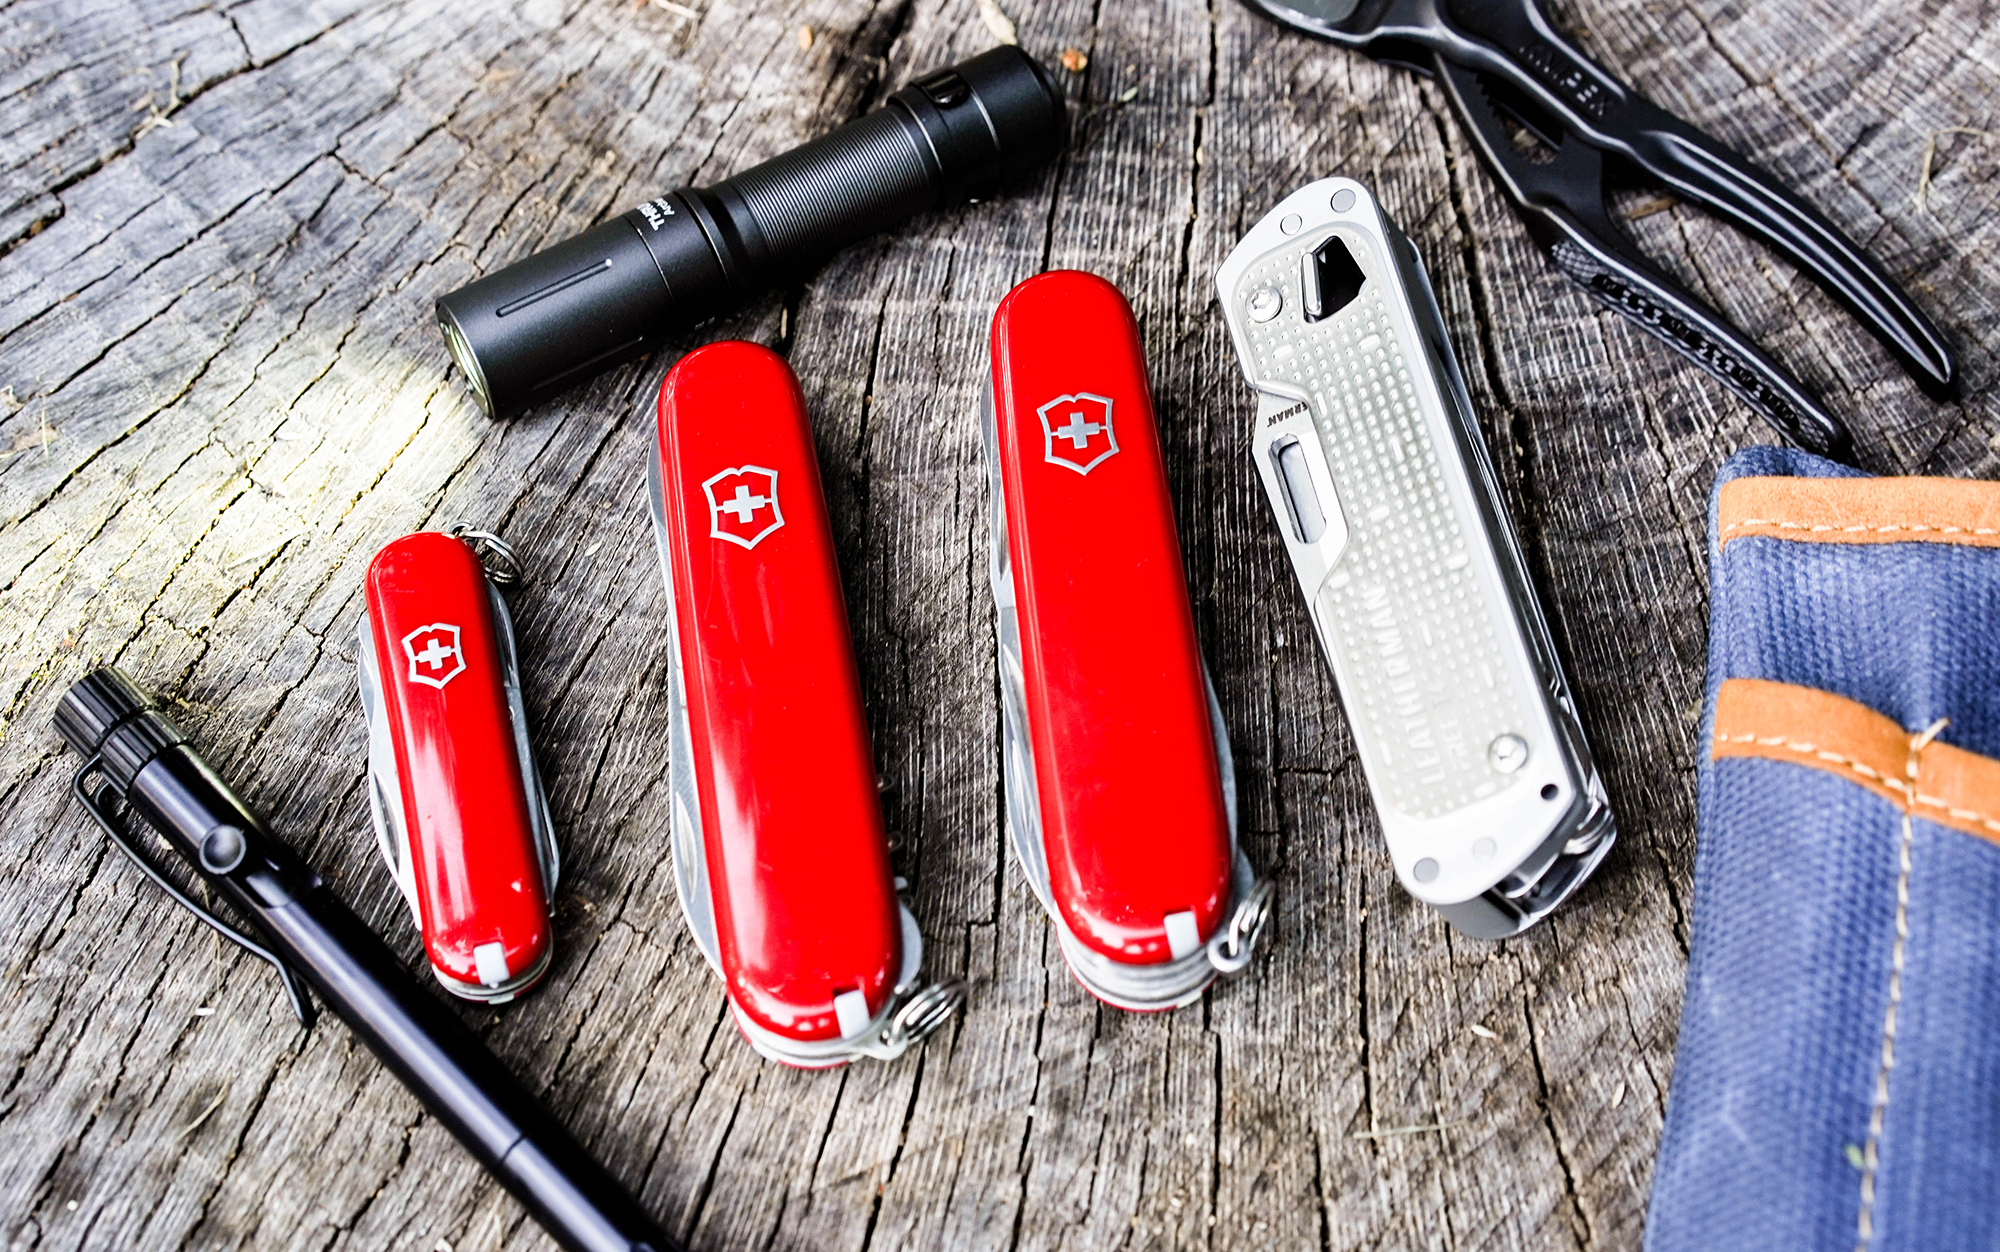 Swiss Army Knife iPhone Case??? (IN1 Multi-Tool Utility Case